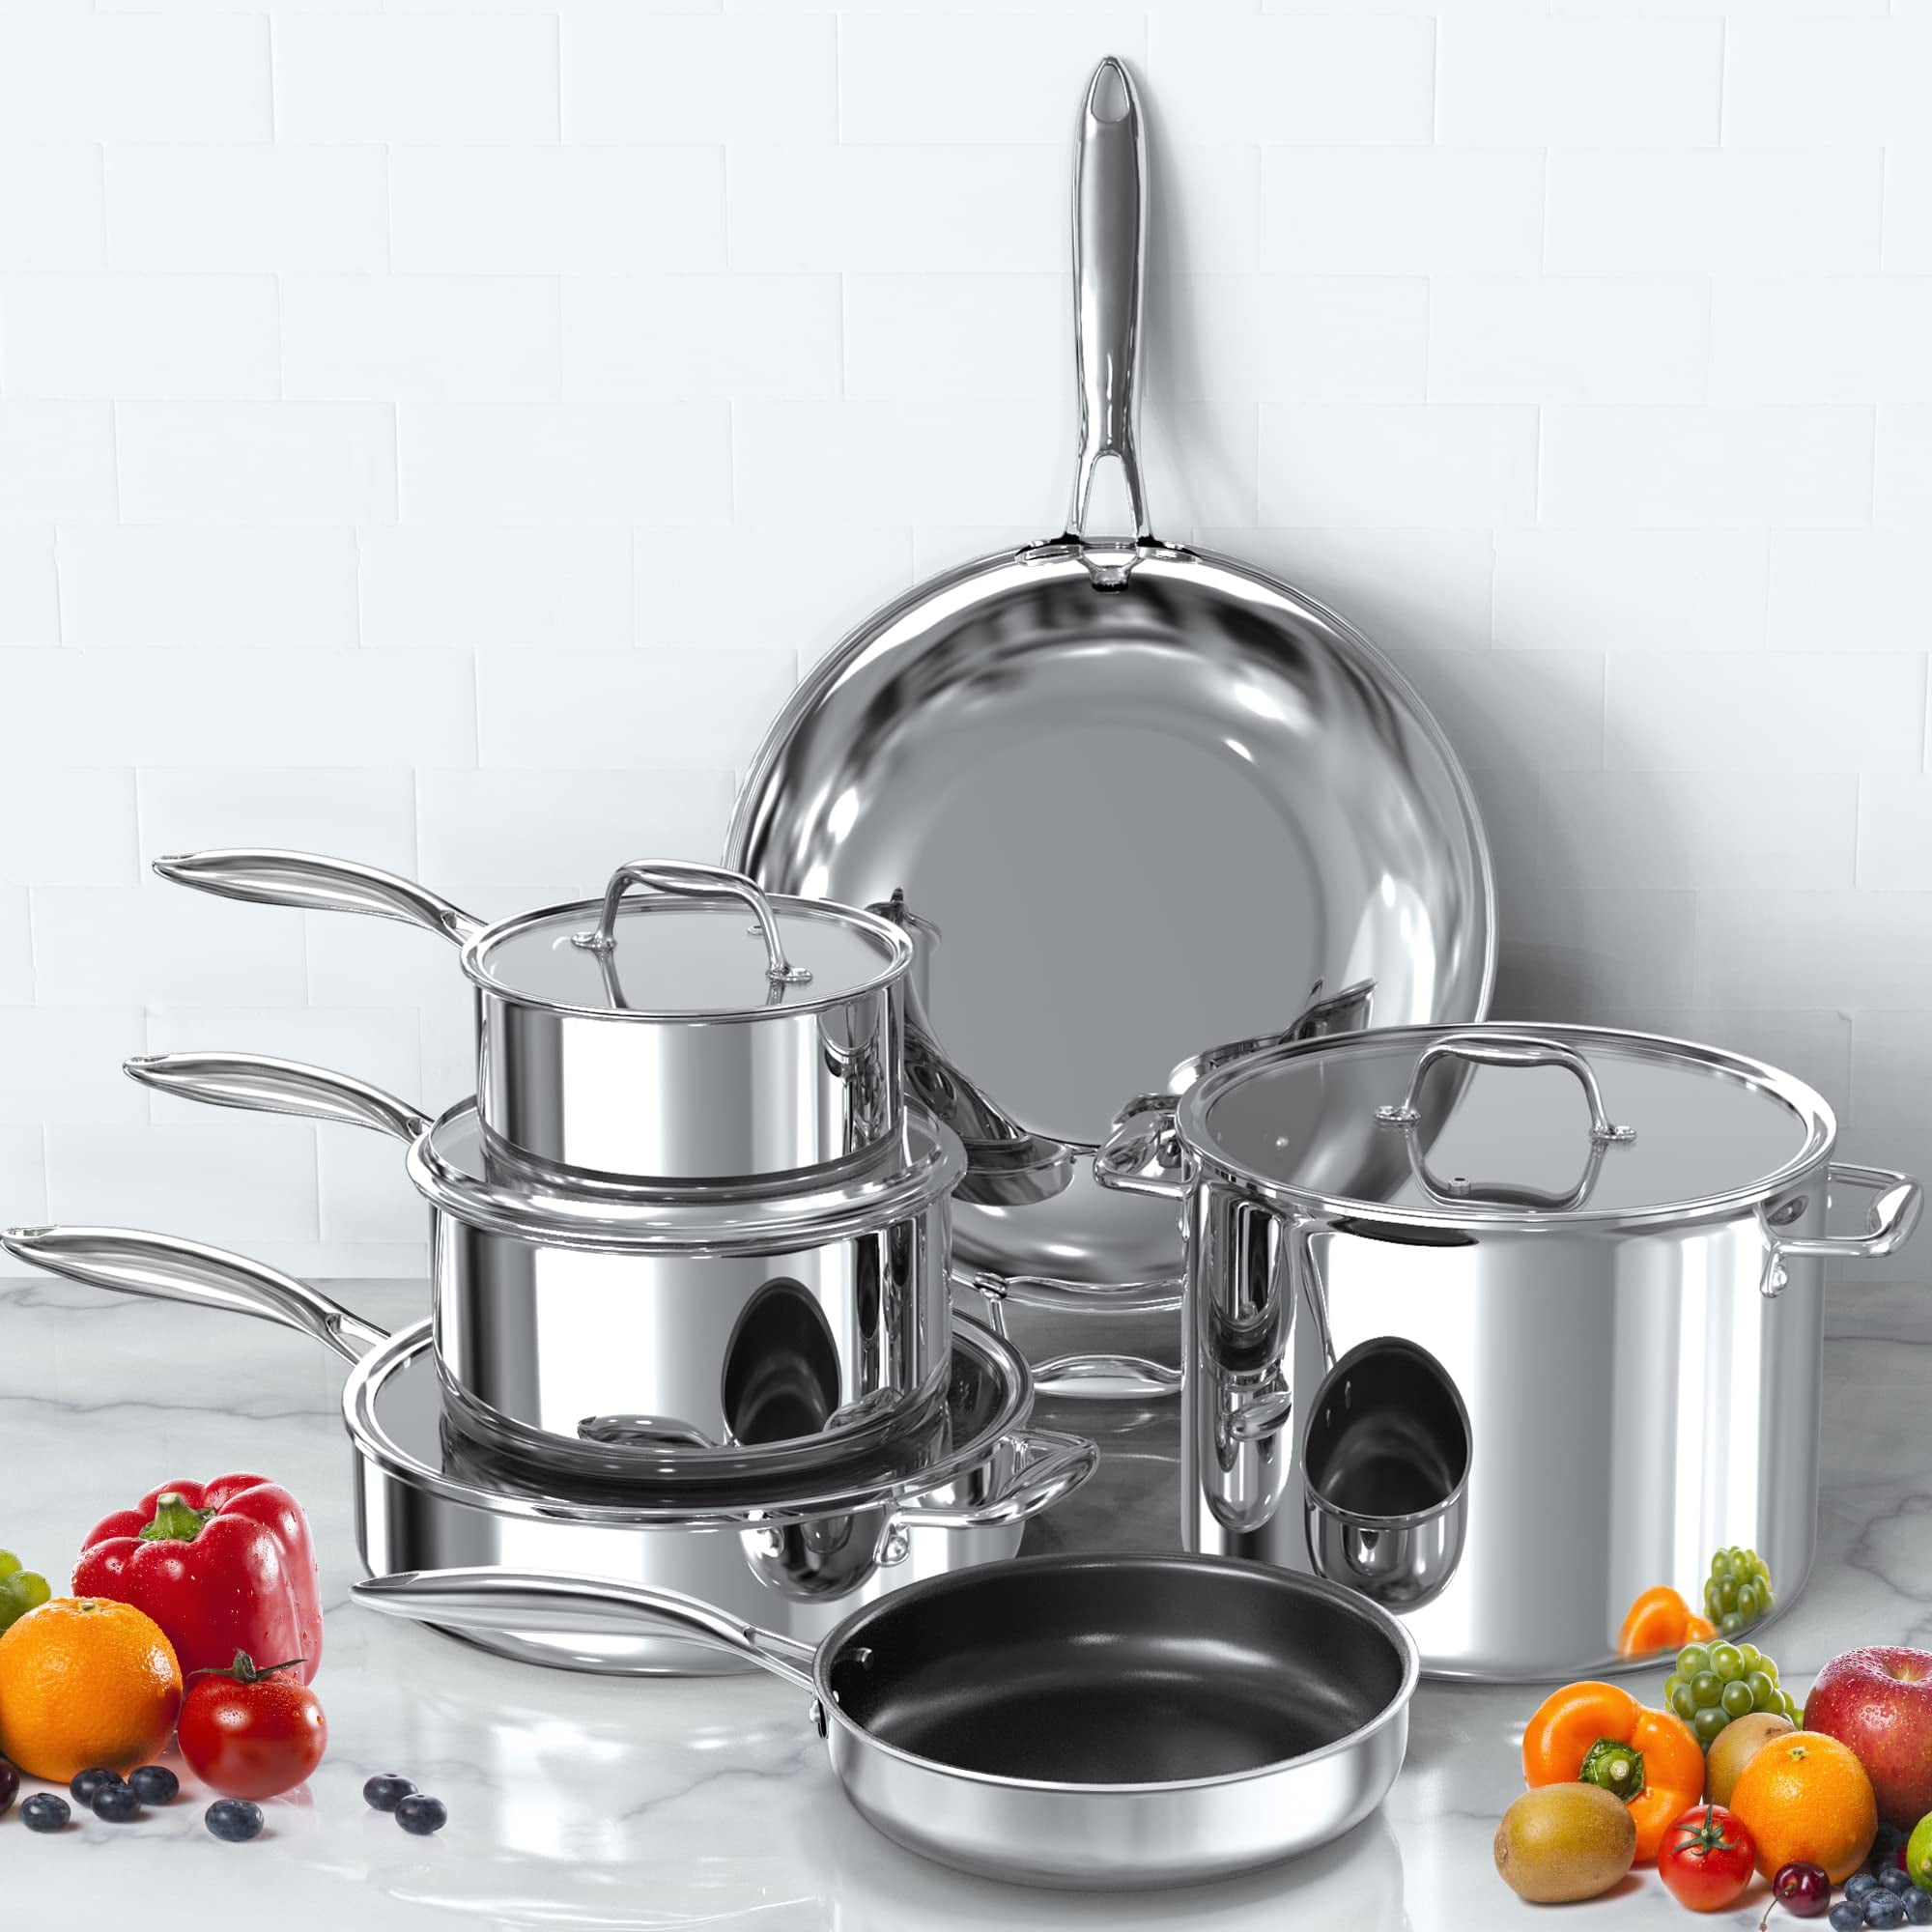 Buying Stainless Steel Cookware? Read this First - IMARKU